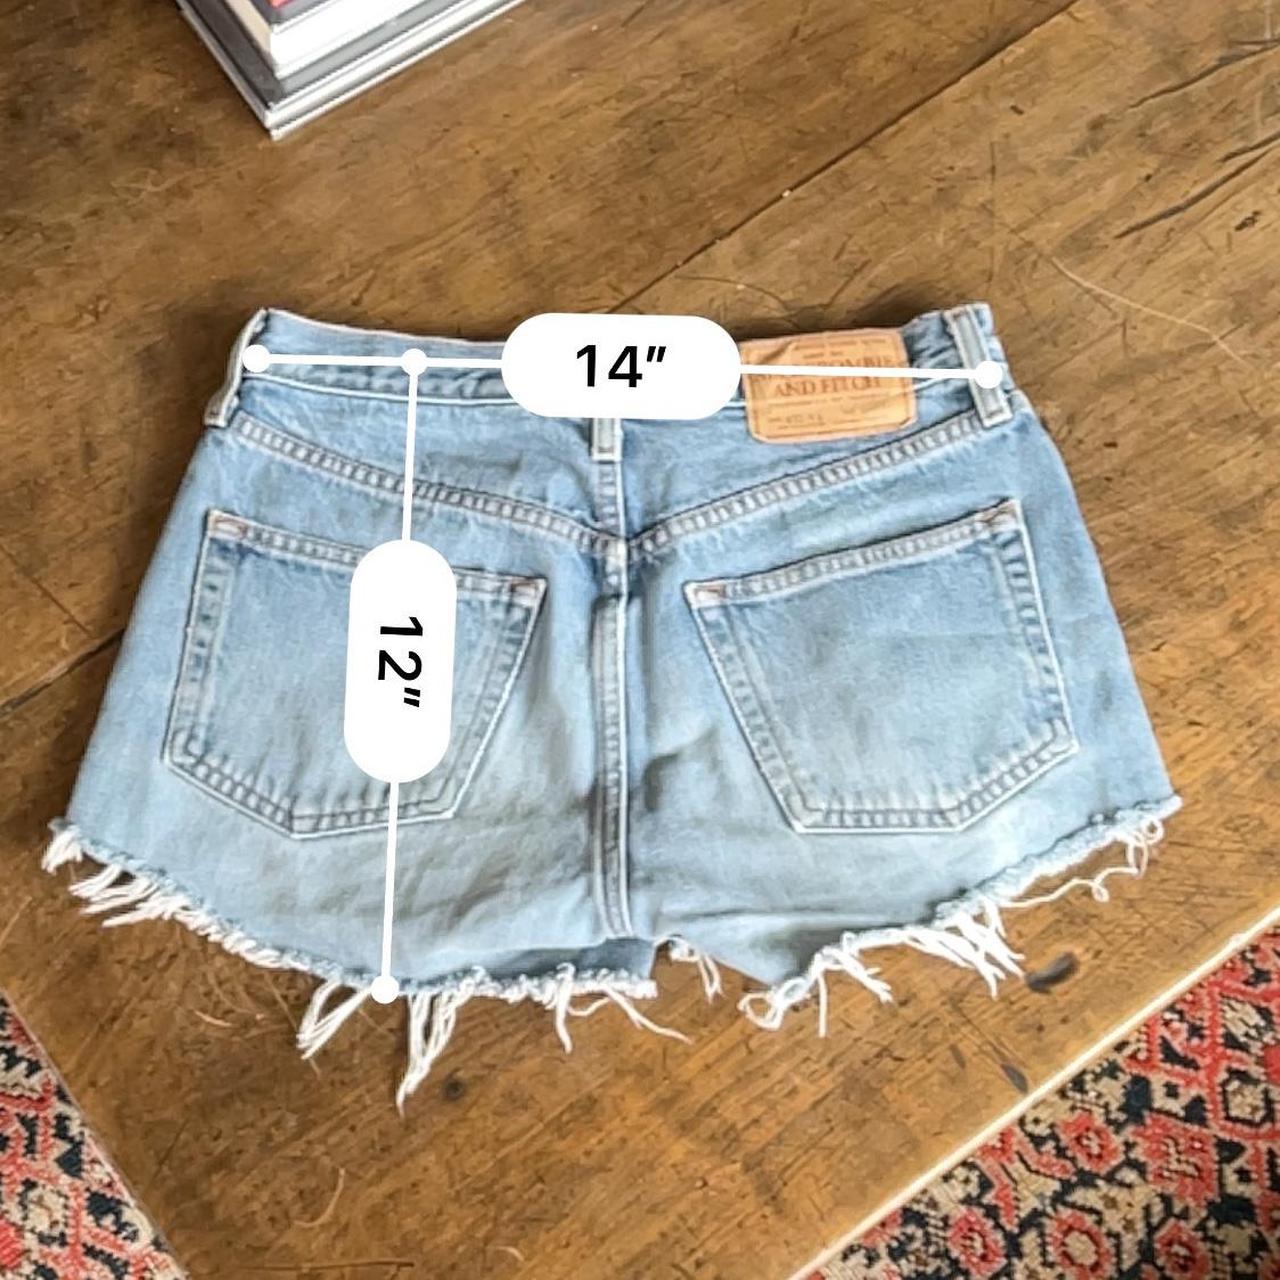 Abercrombie & Fitch Women's Blue and Red Shorts | Depop